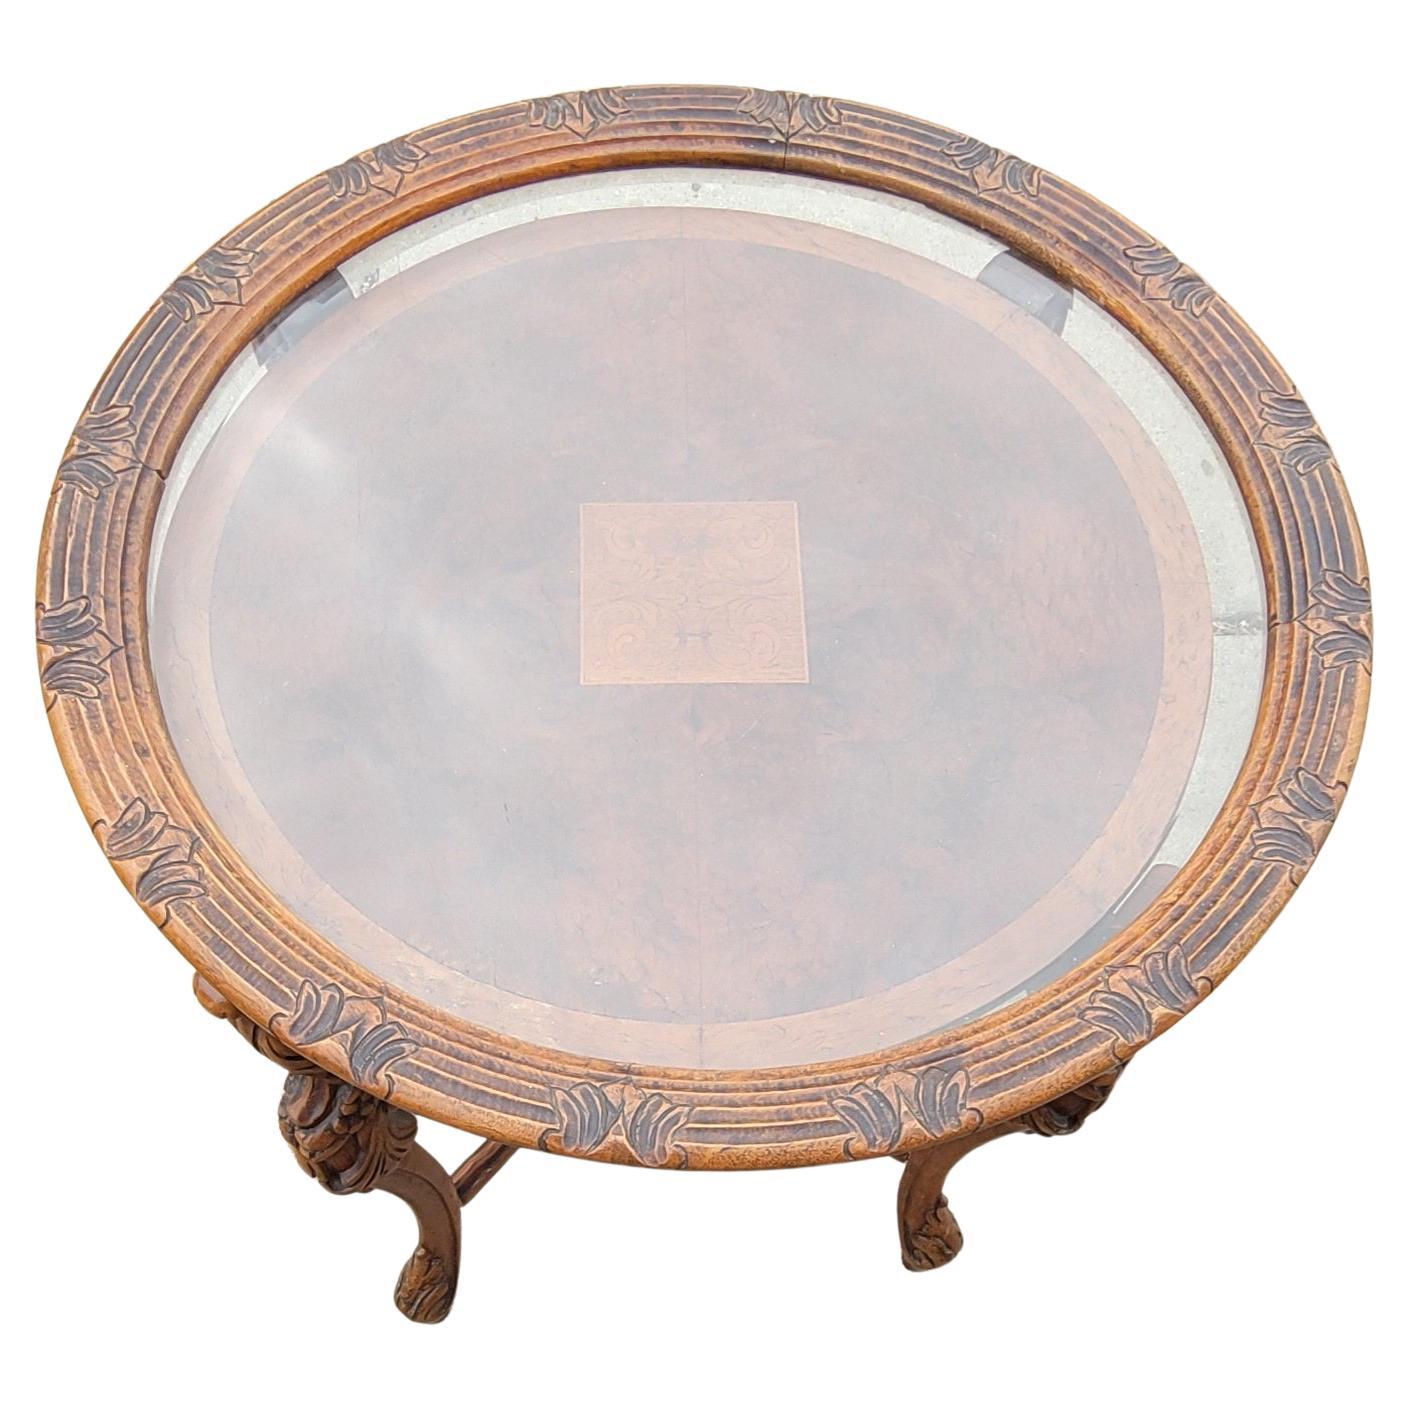 A French Renaissance style carved walnut side table with glass tray top. Glass tray removable.
Measure s23